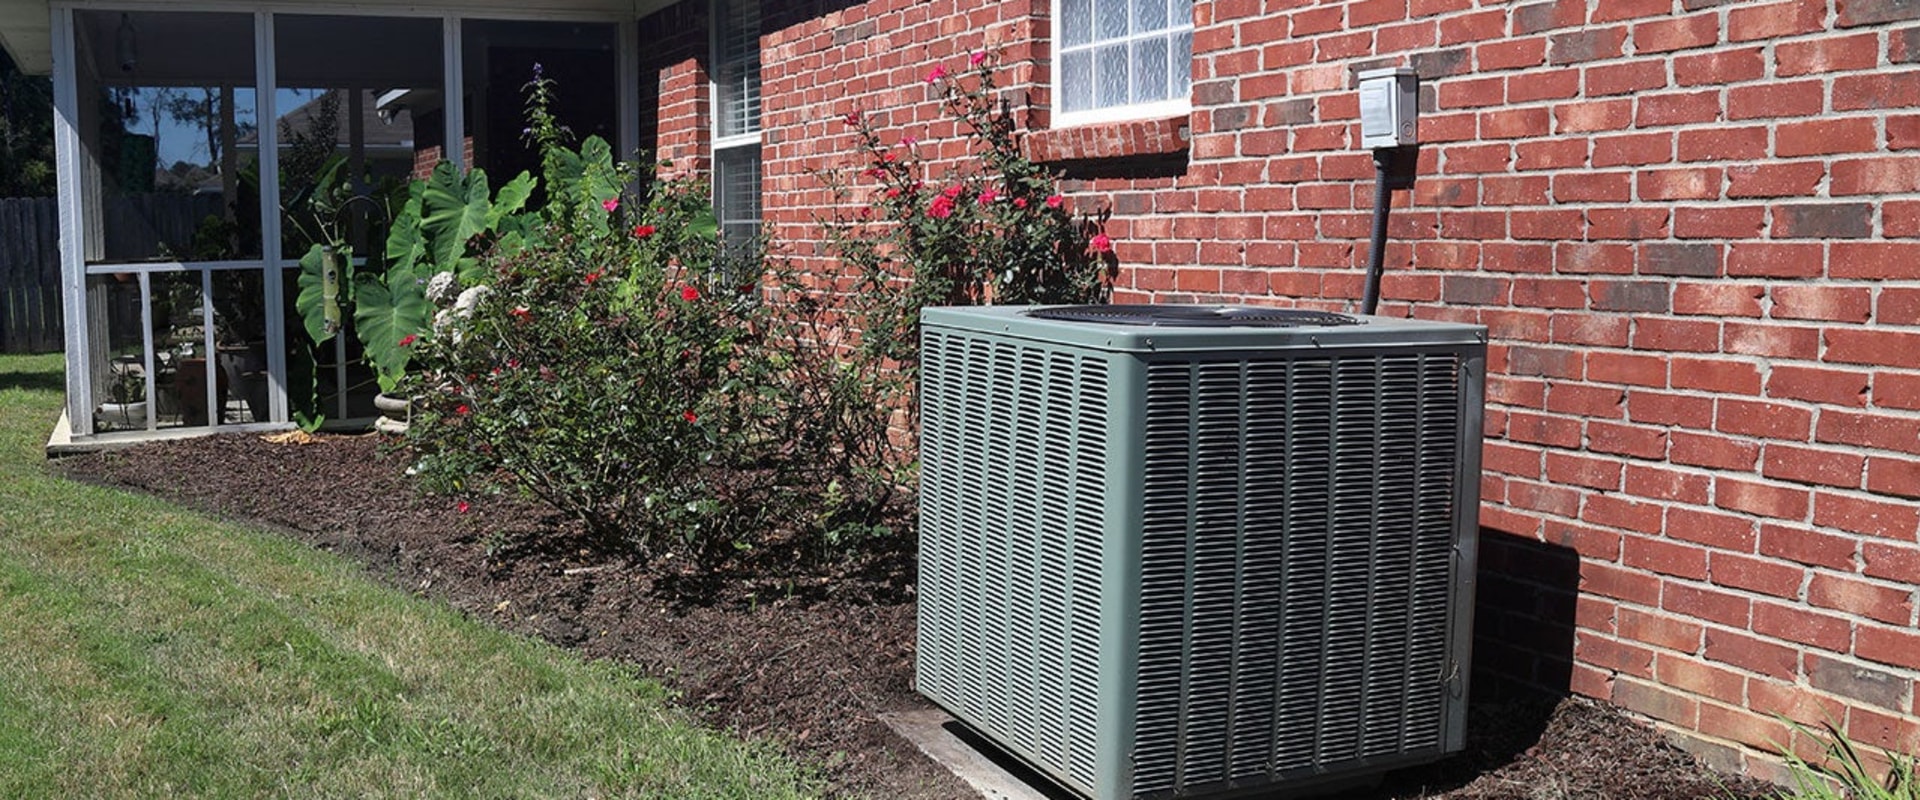 Replacing the HVAC System: Capital or Expense?